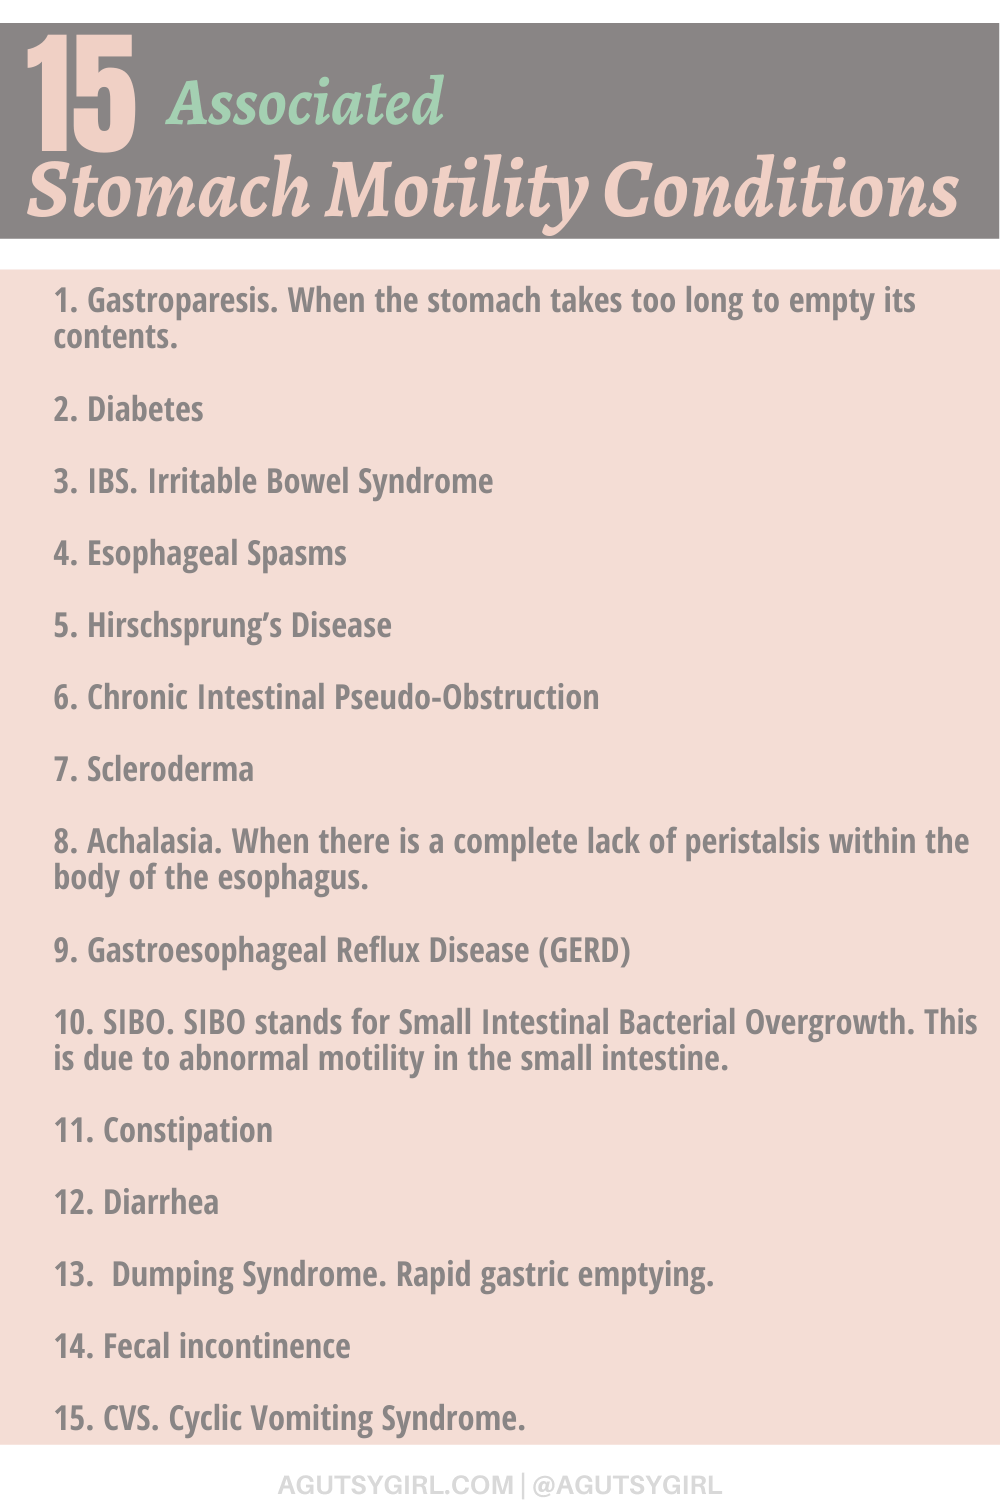 15 Associated Stomach Motility Conditions agutsygirl.com #stomachmotility #digestion #constipation